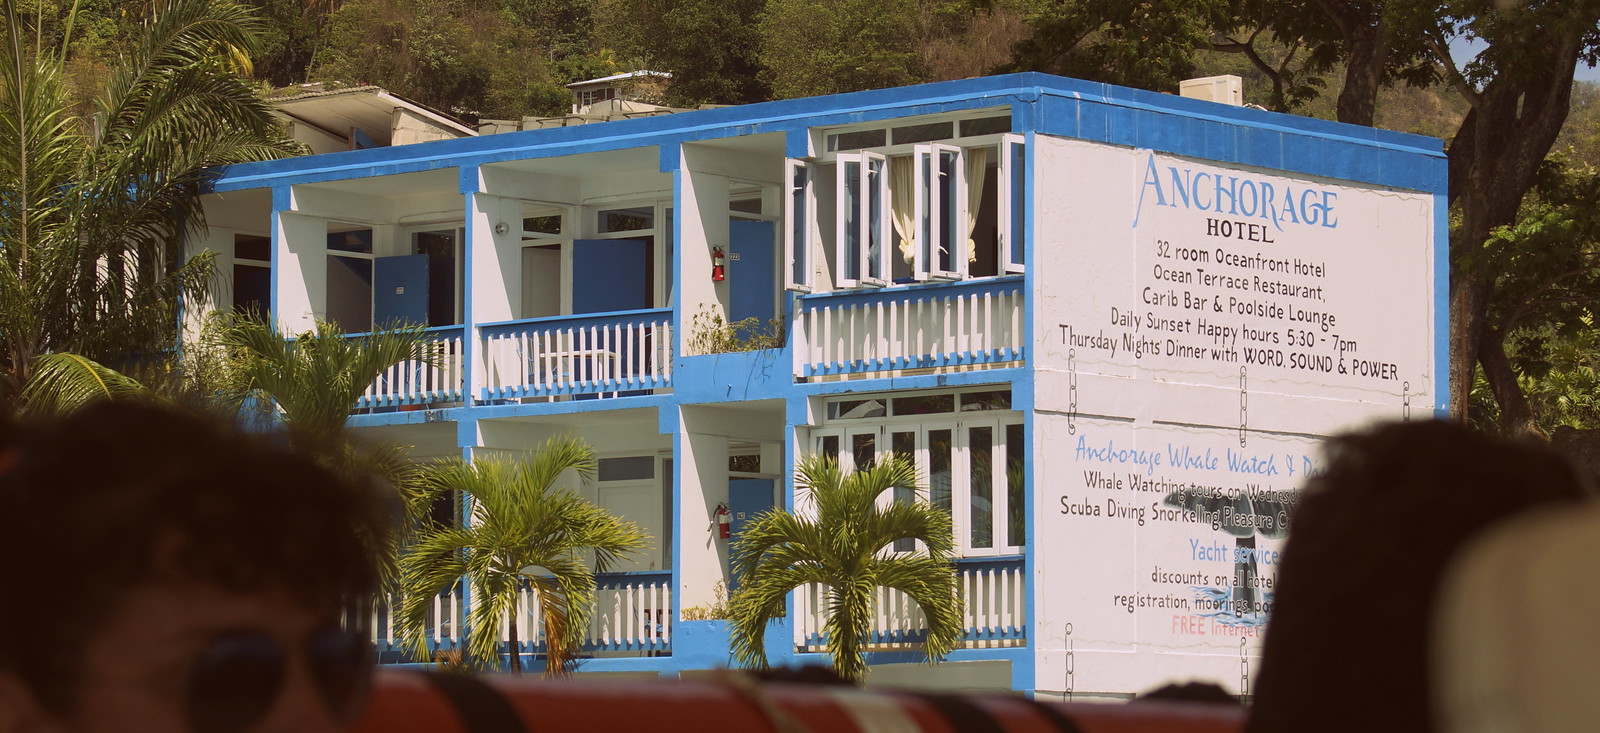 Anchorage Hotel and Whale Watching Center Dominica